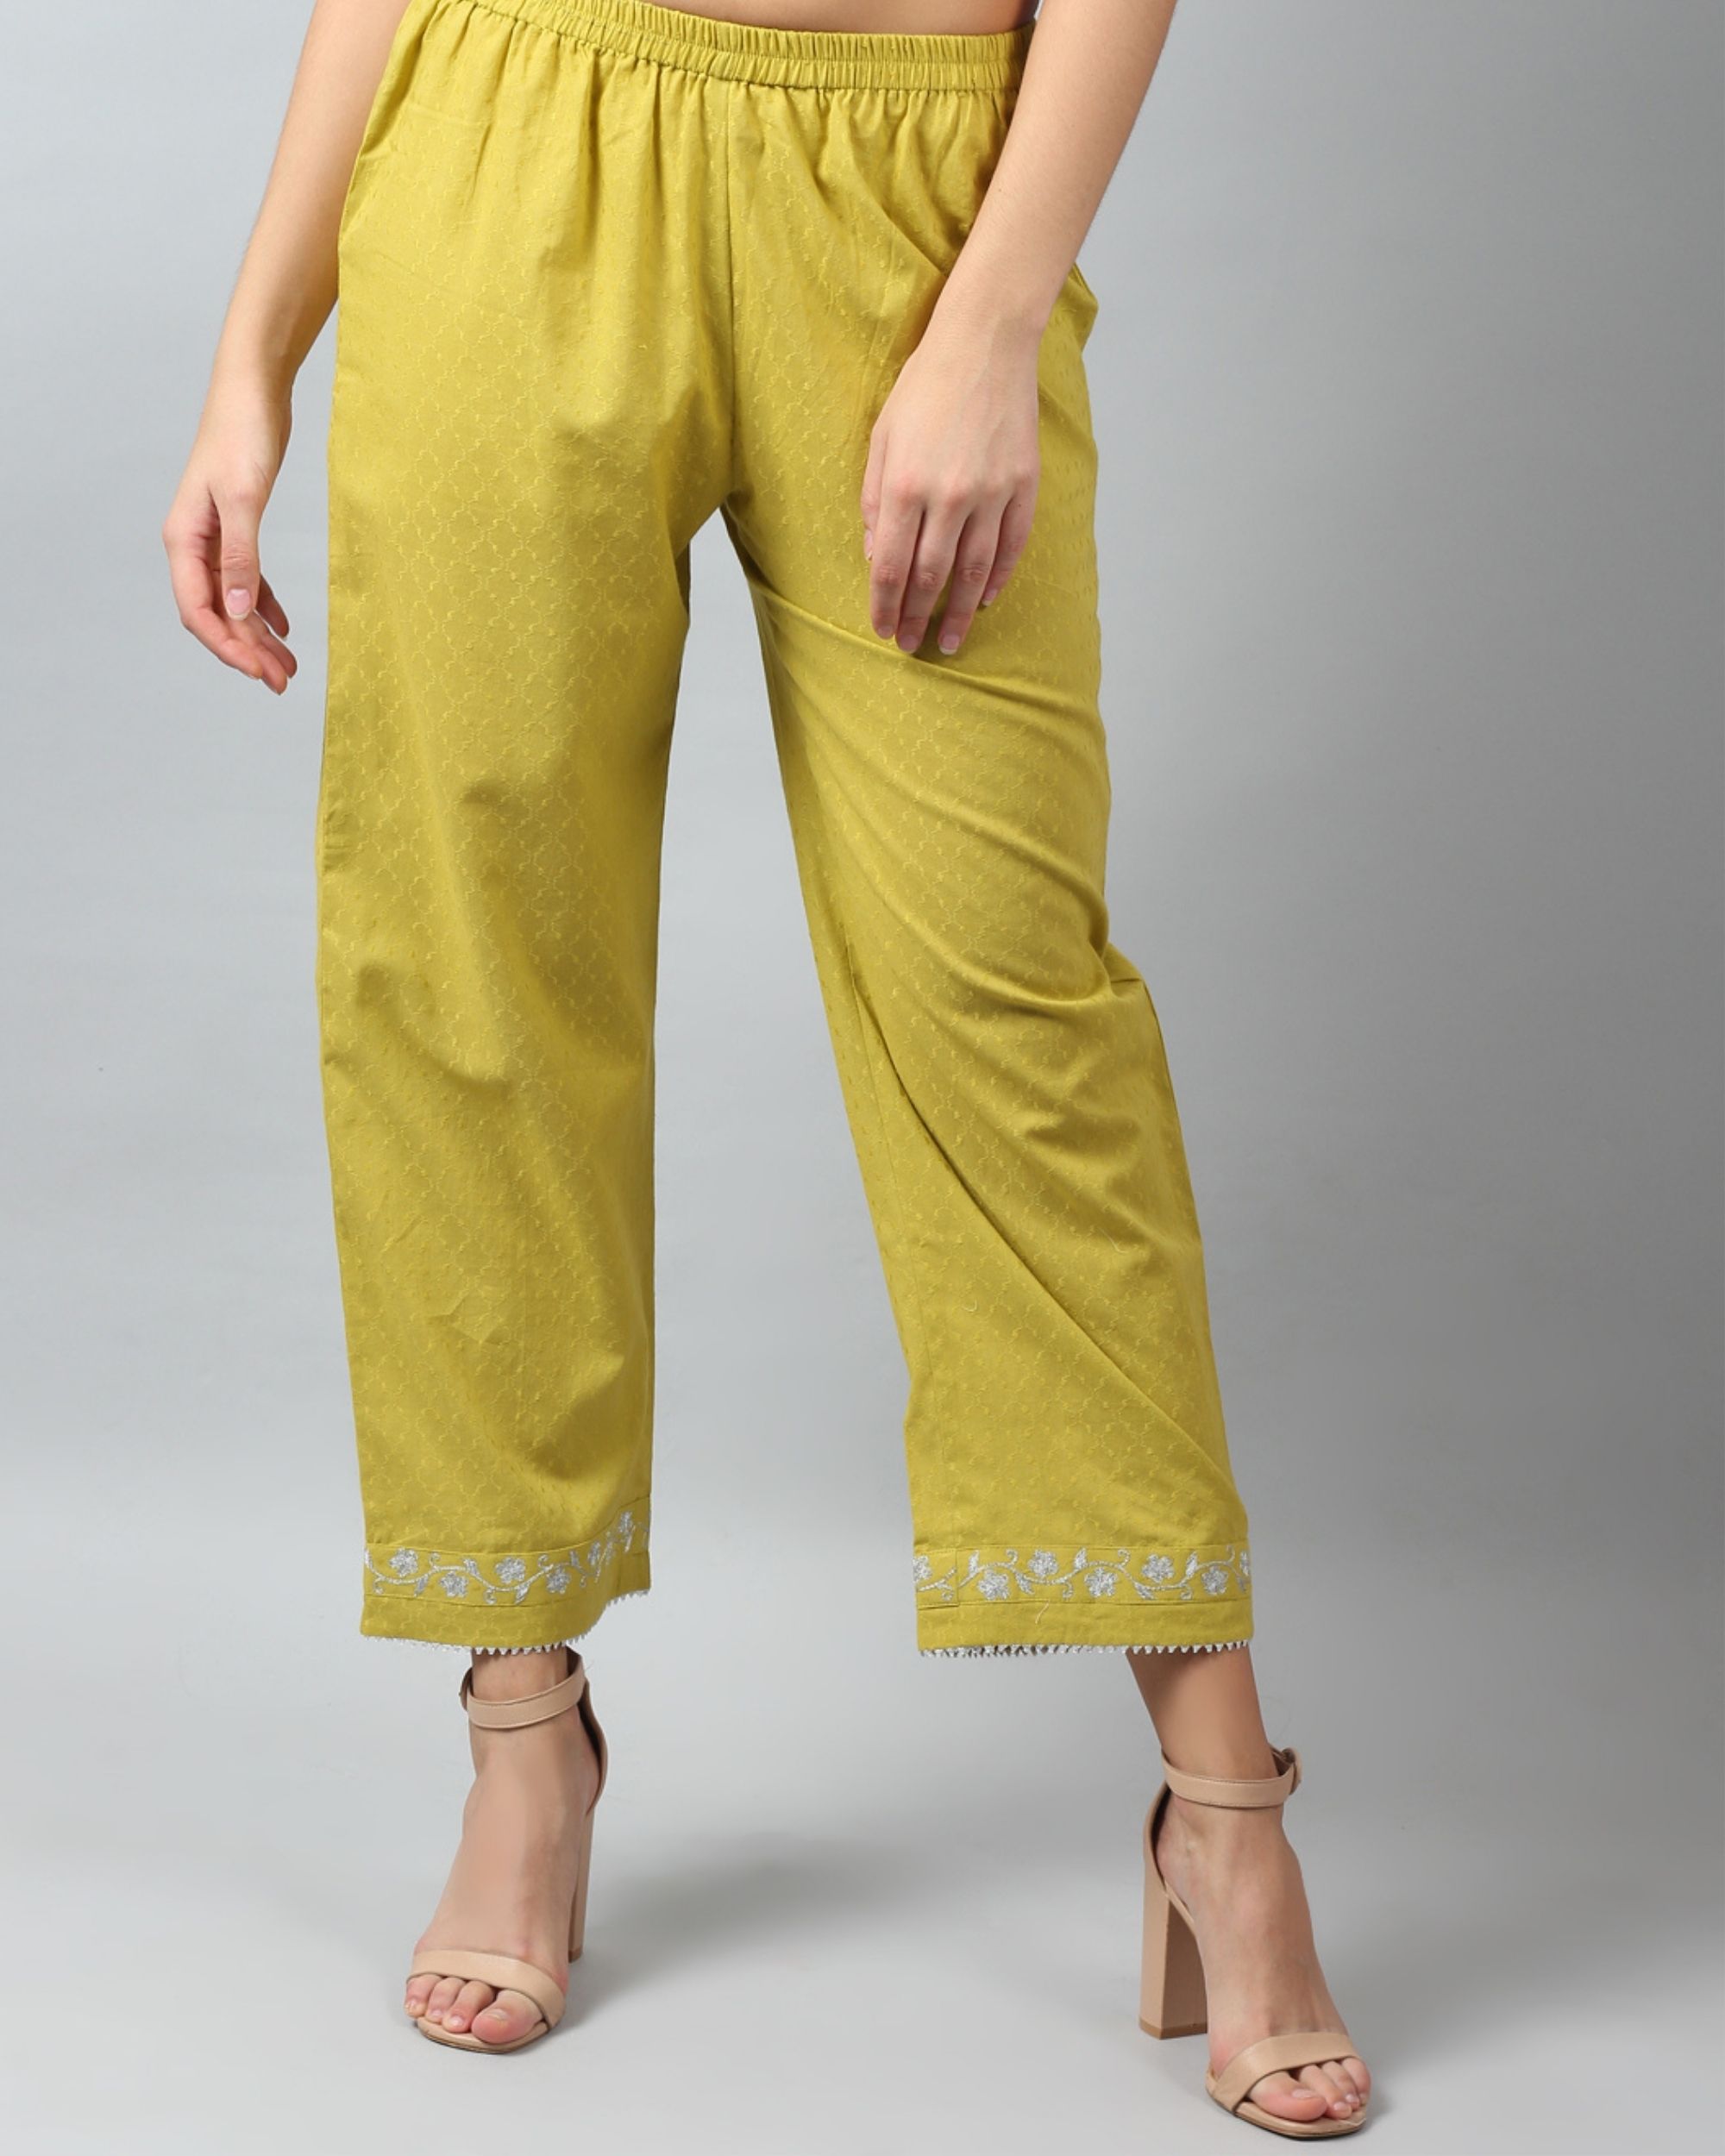 Chartreuse embroidered pants by D'ART STUDIO | The Secret Label